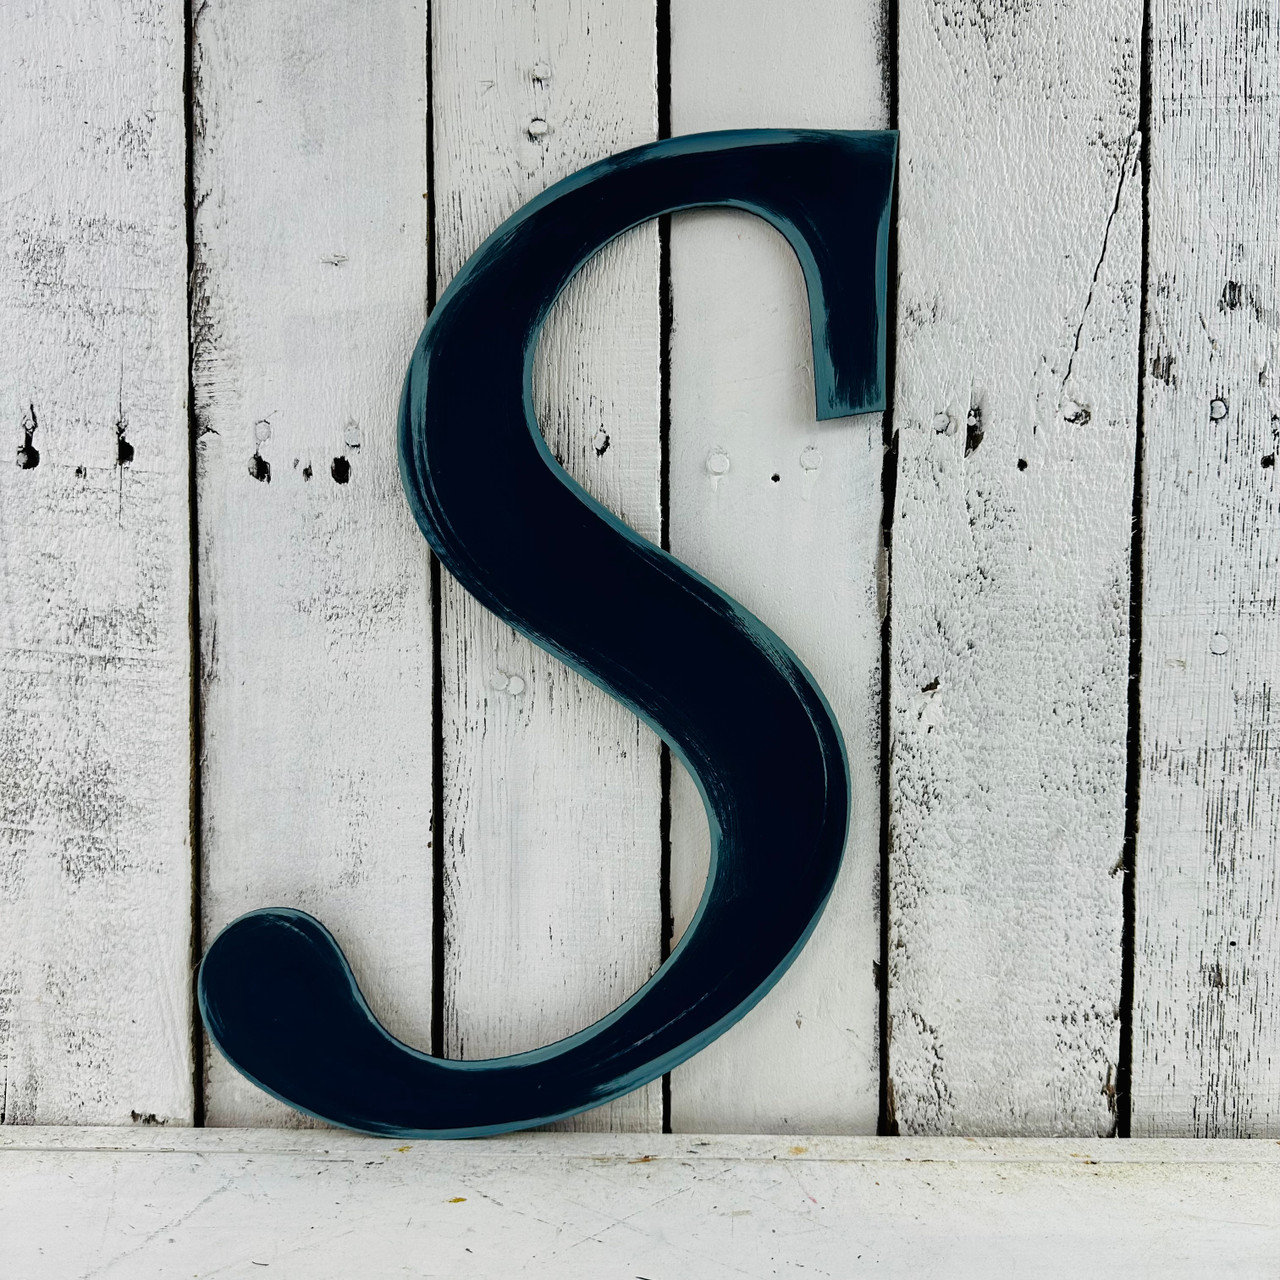  Large 12 Hand Painted Gold Letter Wall Decor Monogram